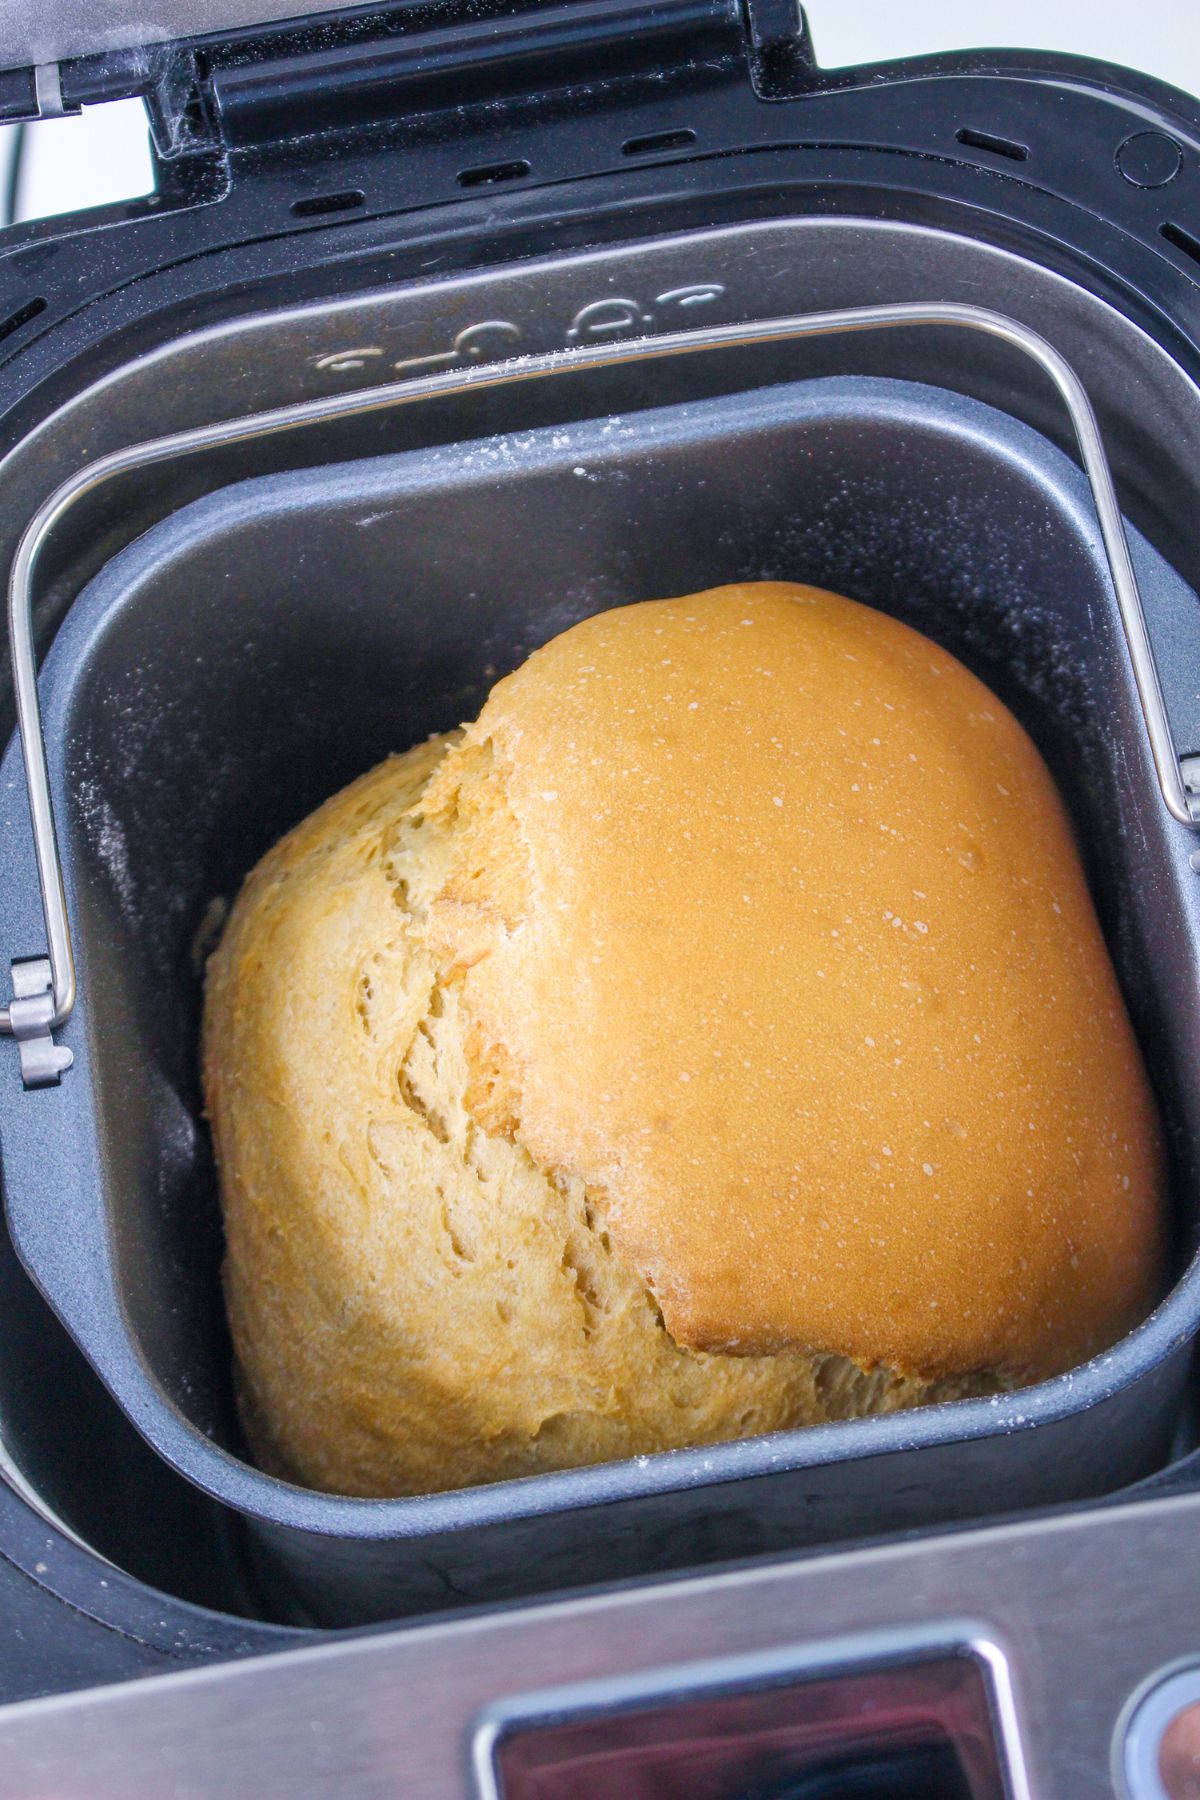 baked bread in the loaf pan of a machine.